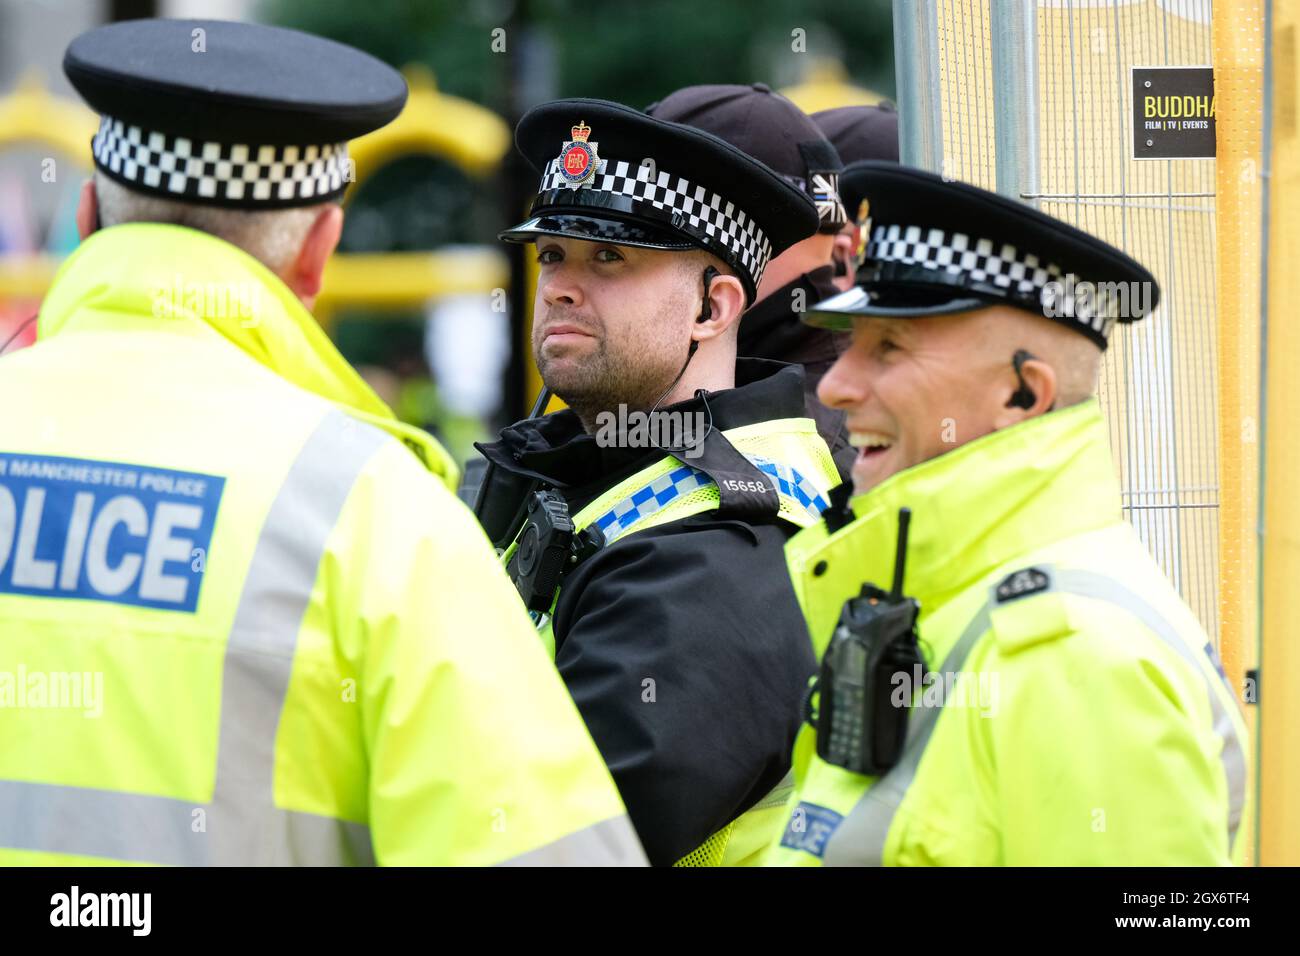 Manchester, UK – Monday 4th October 2021 – Greater Manchester Police officers stand outside the ring of steel protecting the Midland Hotel and conference centre during the Conservative Party Conference. Photo Steven May / Alamy Live News Stock Photo